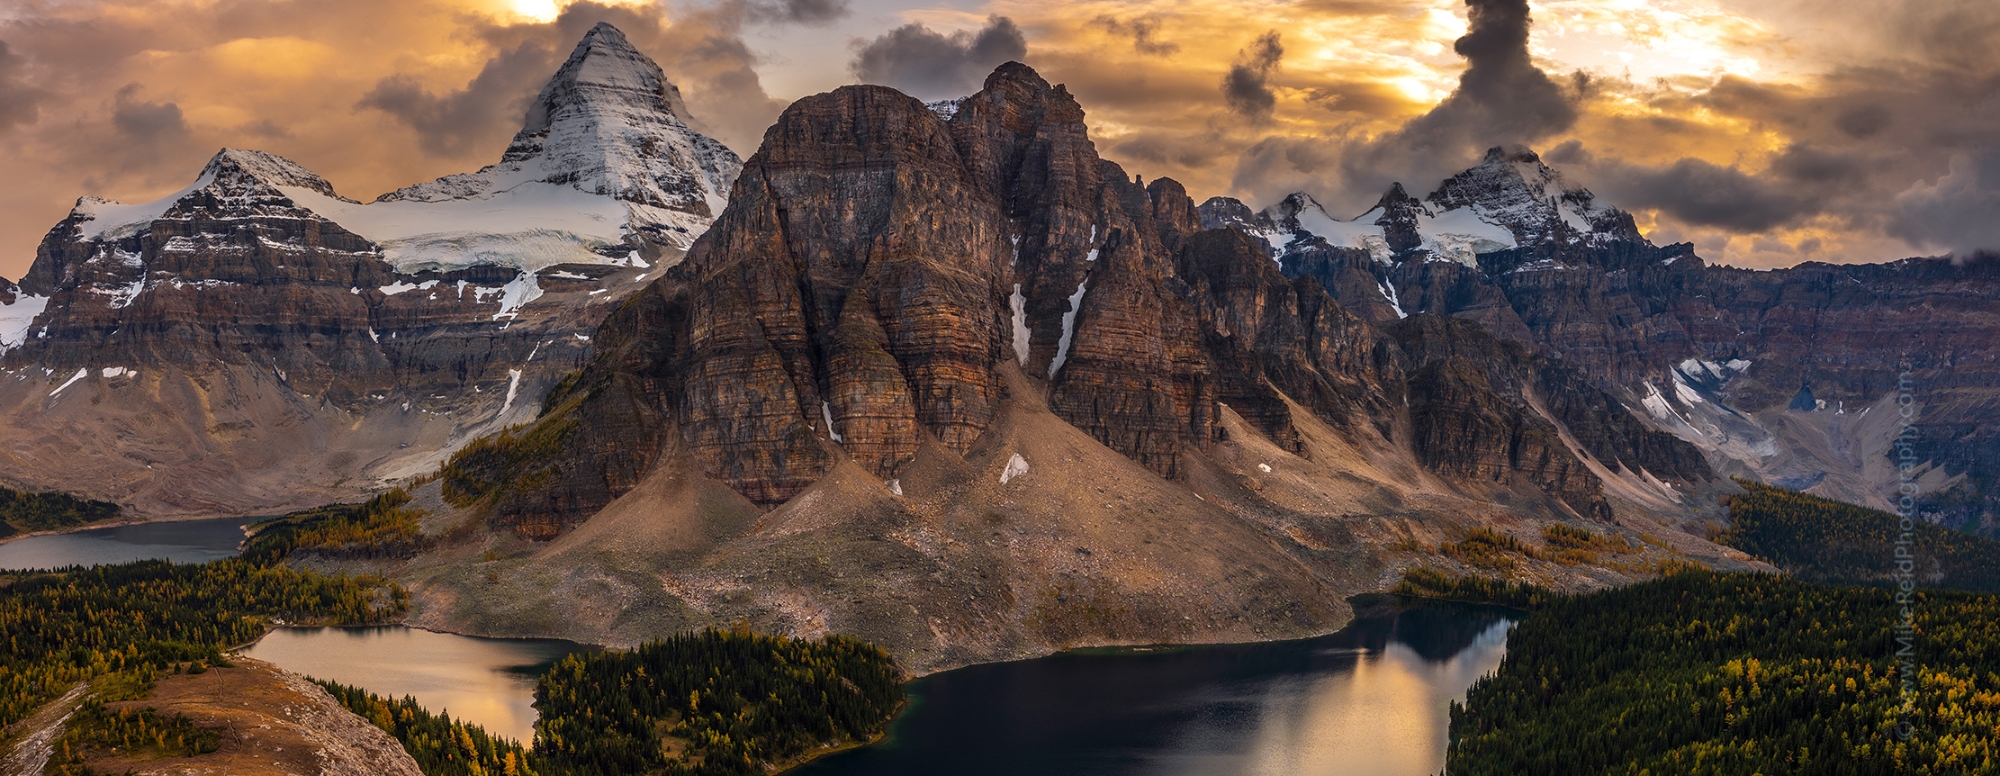 Mount Assiniboine from the Nub Panorama